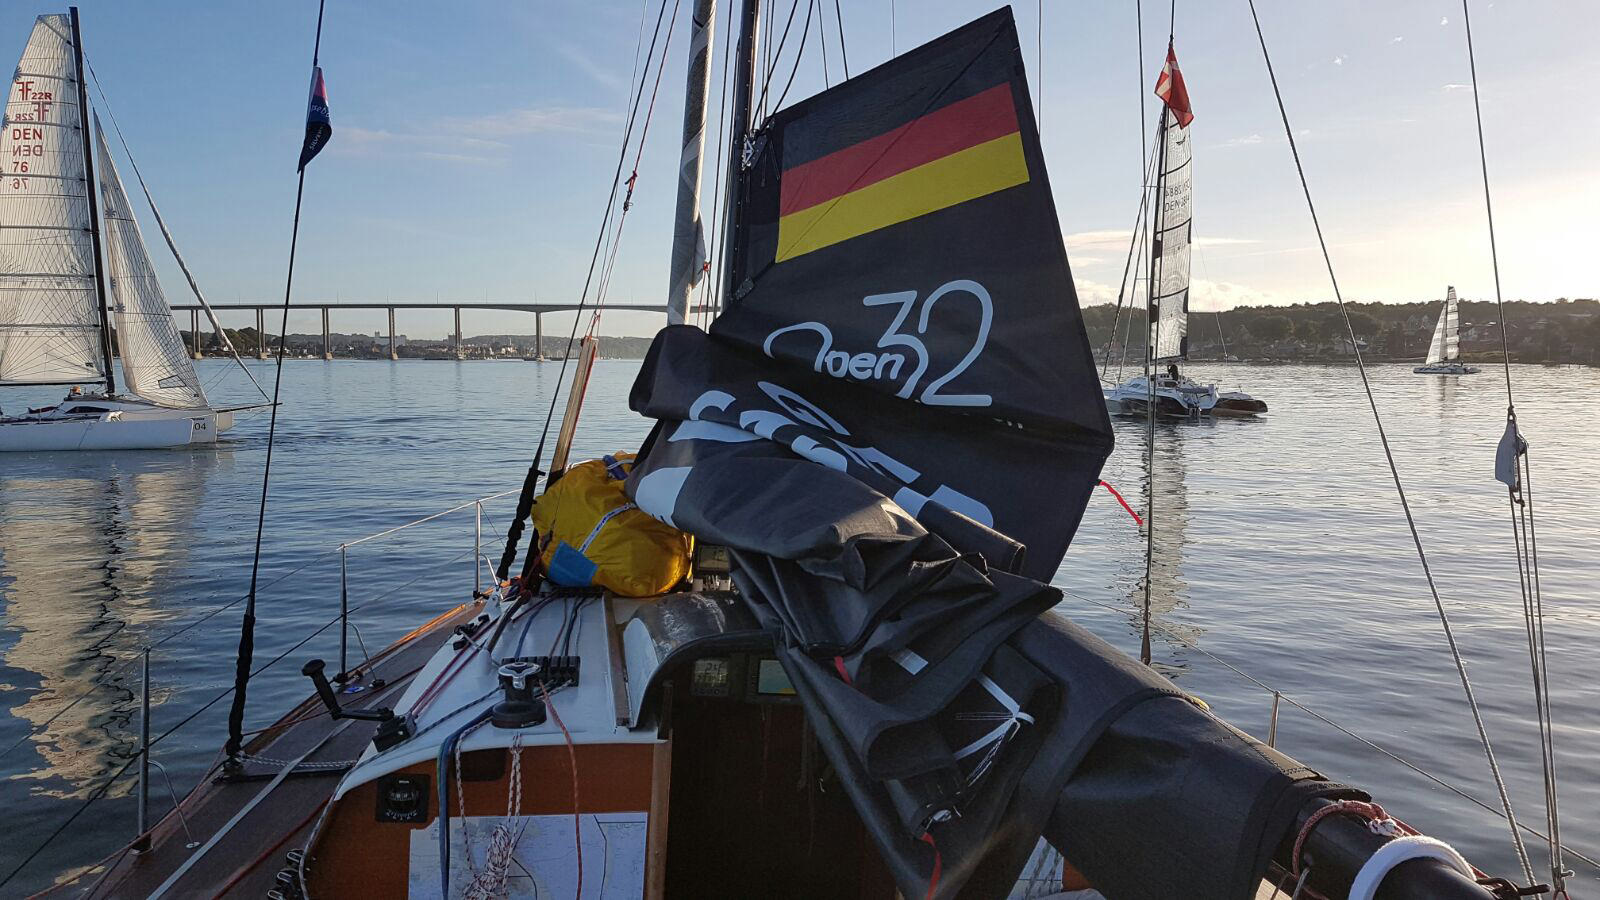 The Open 32 BLACK MAGGY, sailed a fantastic race, but could not seal the deal. Her skipper Wolle Heibeck stared at the finish line, under the bridge, for three hours while hanging on his anchor waiting for the wind to return.&nbsp;